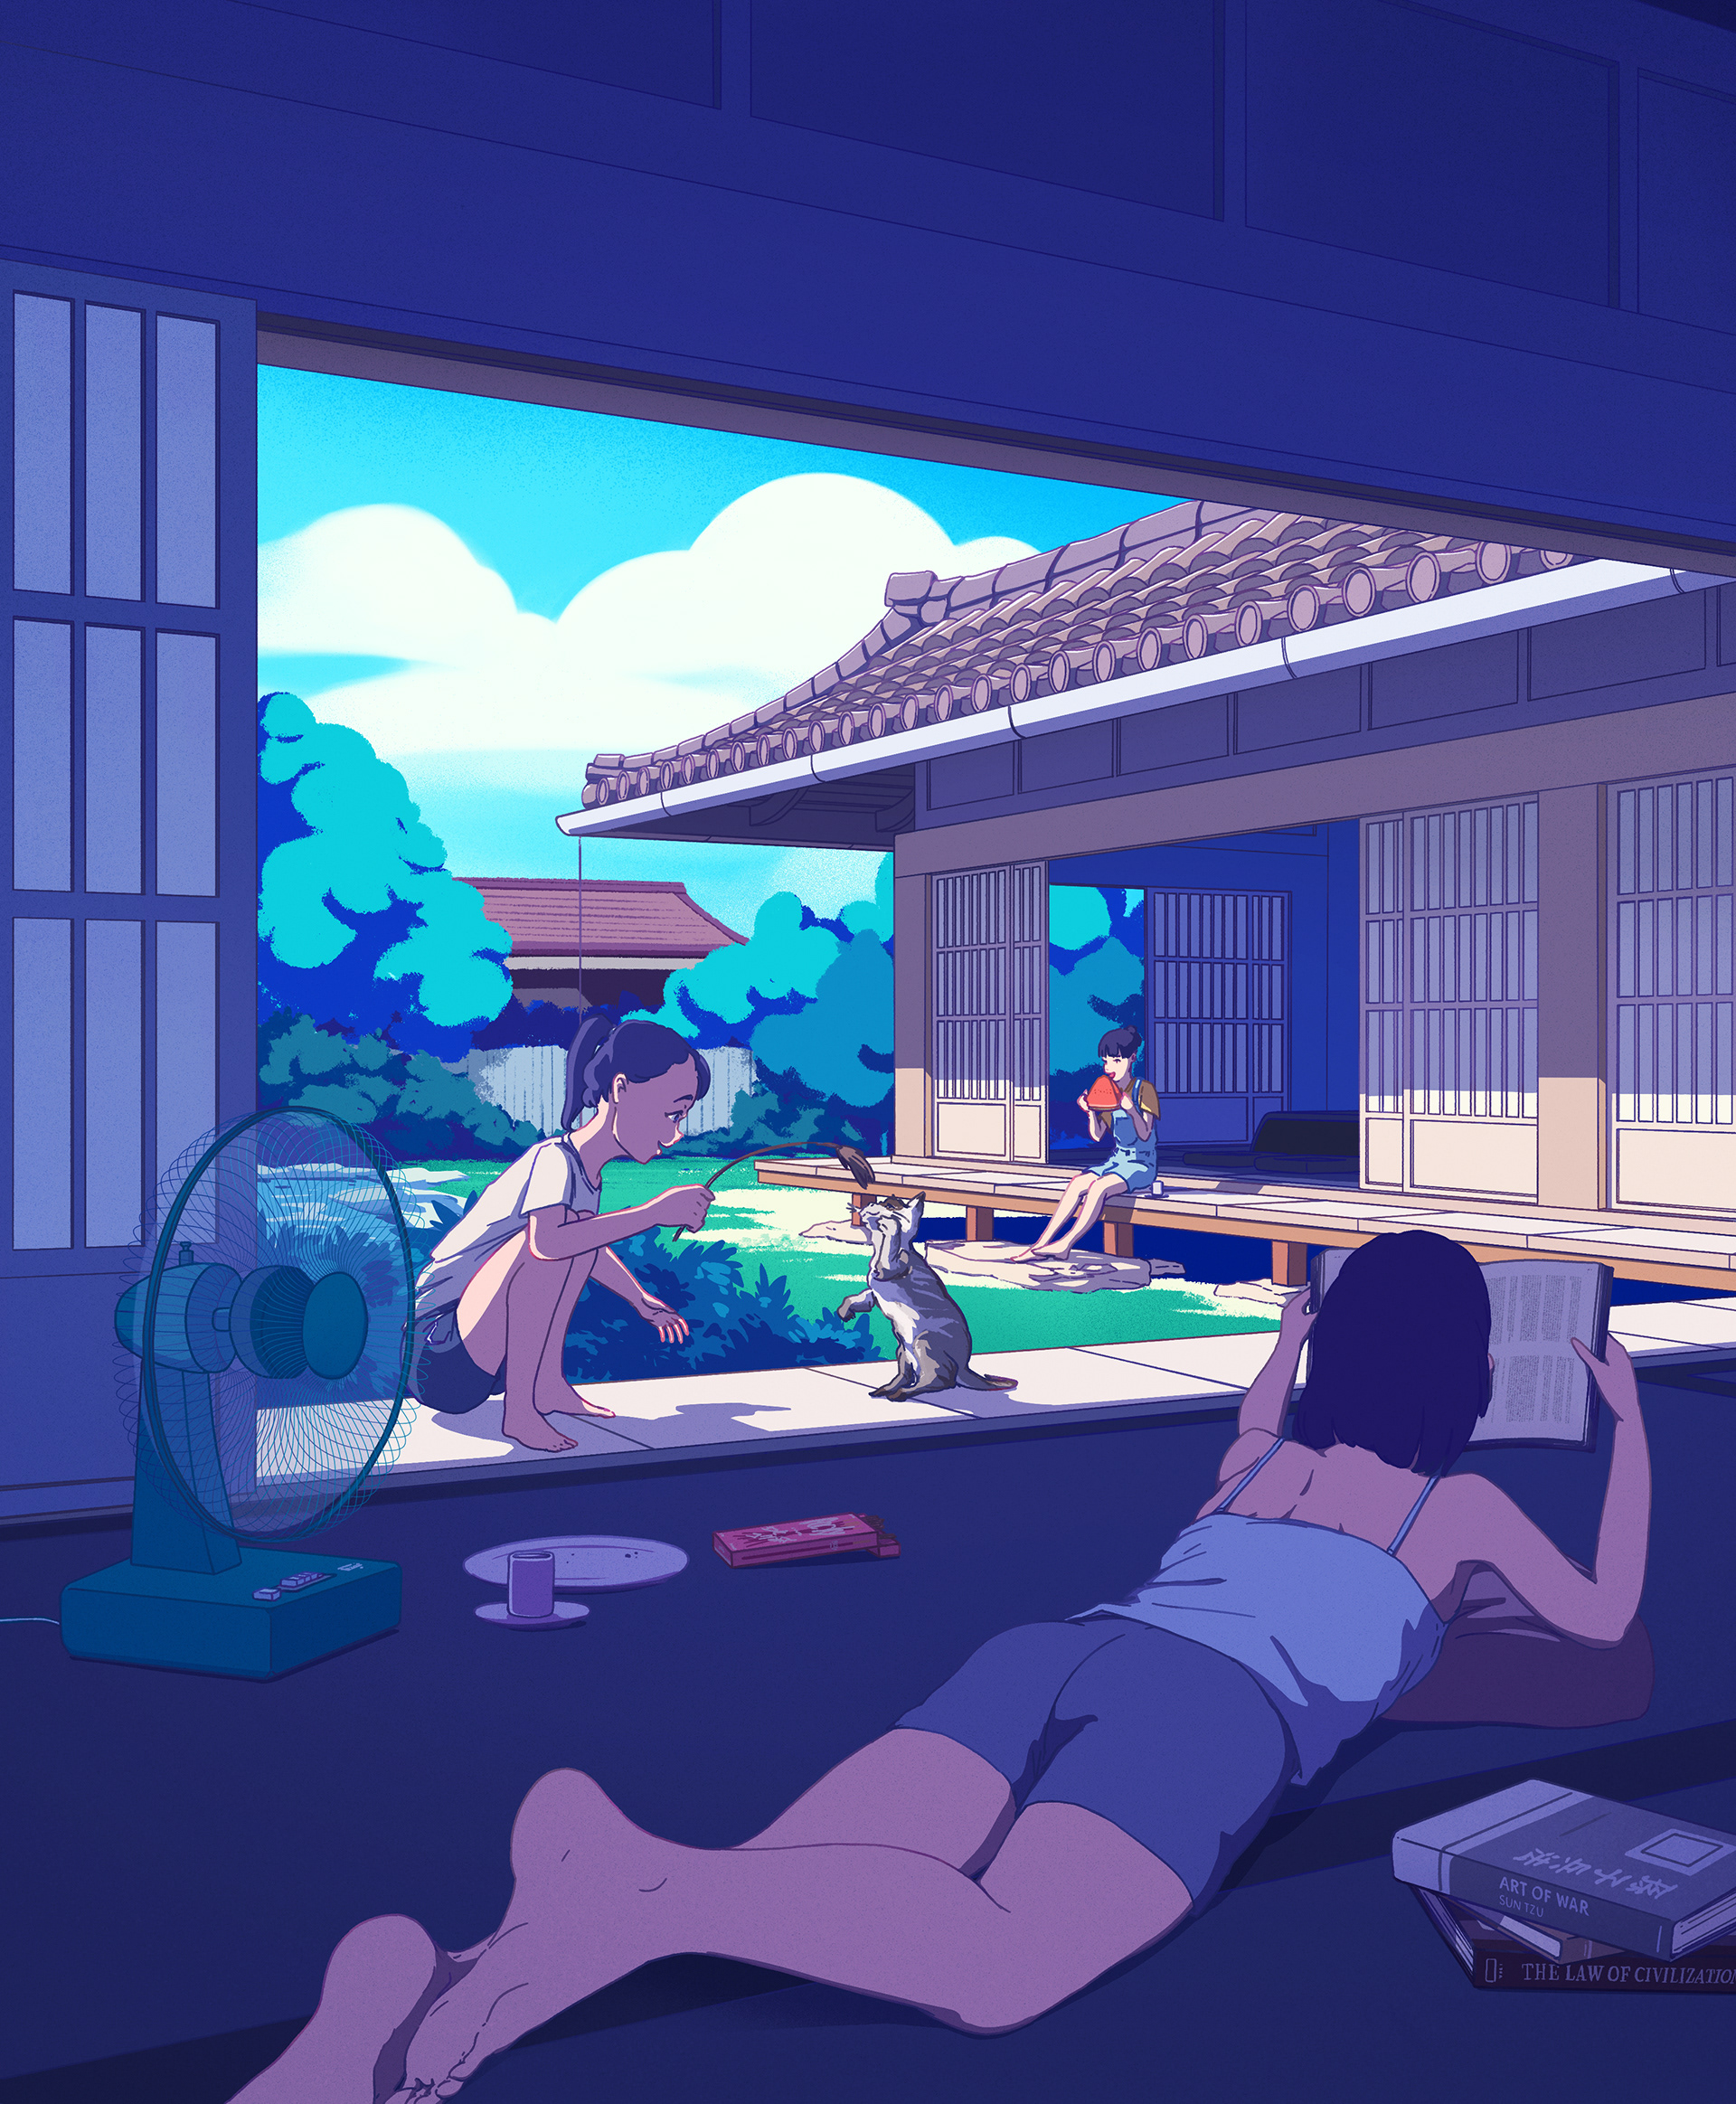 Girls relaxing and having fun at a traditional Japanese house | Behance